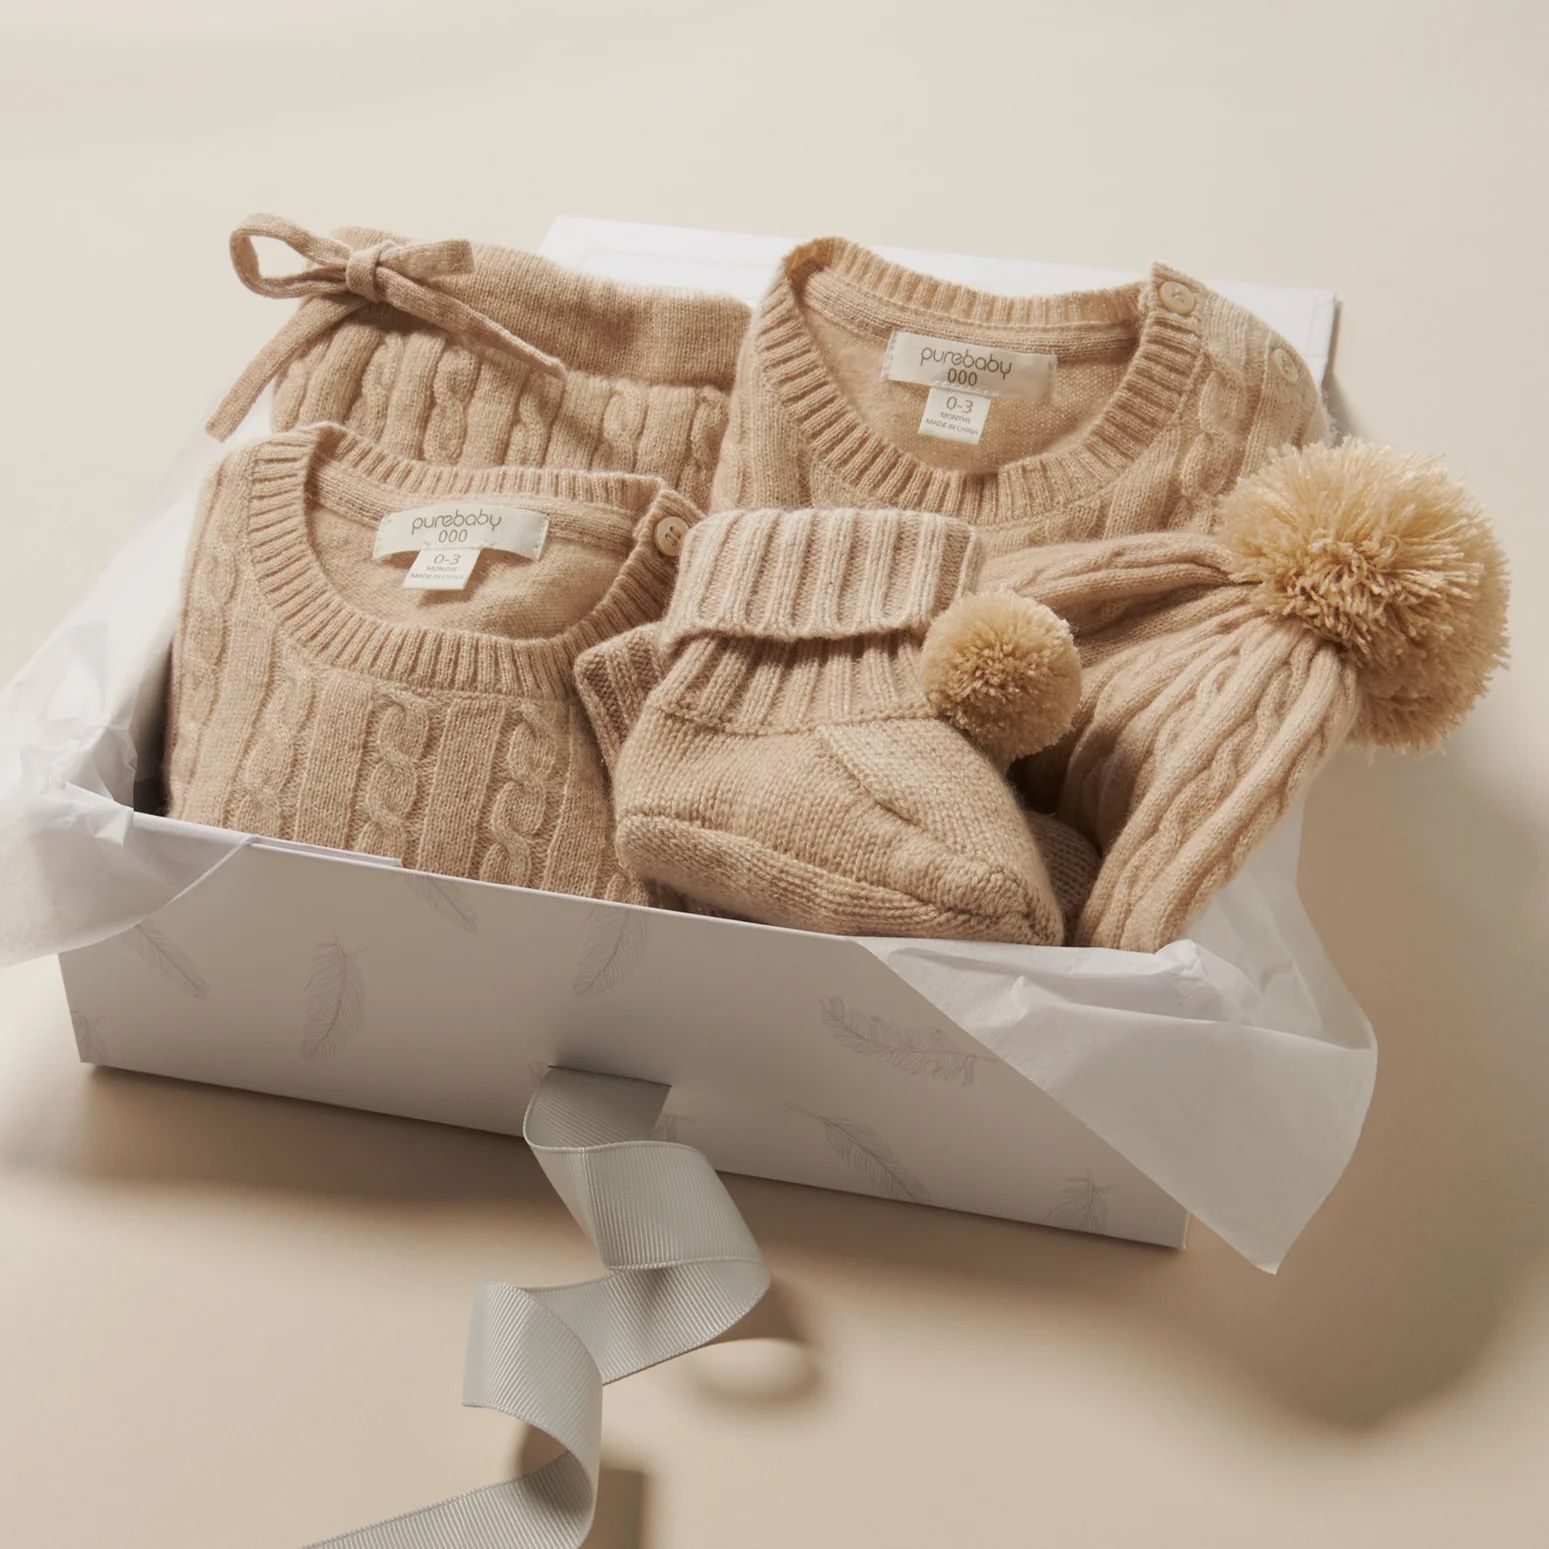 Gift box featuring cashmere styles folded up inside it